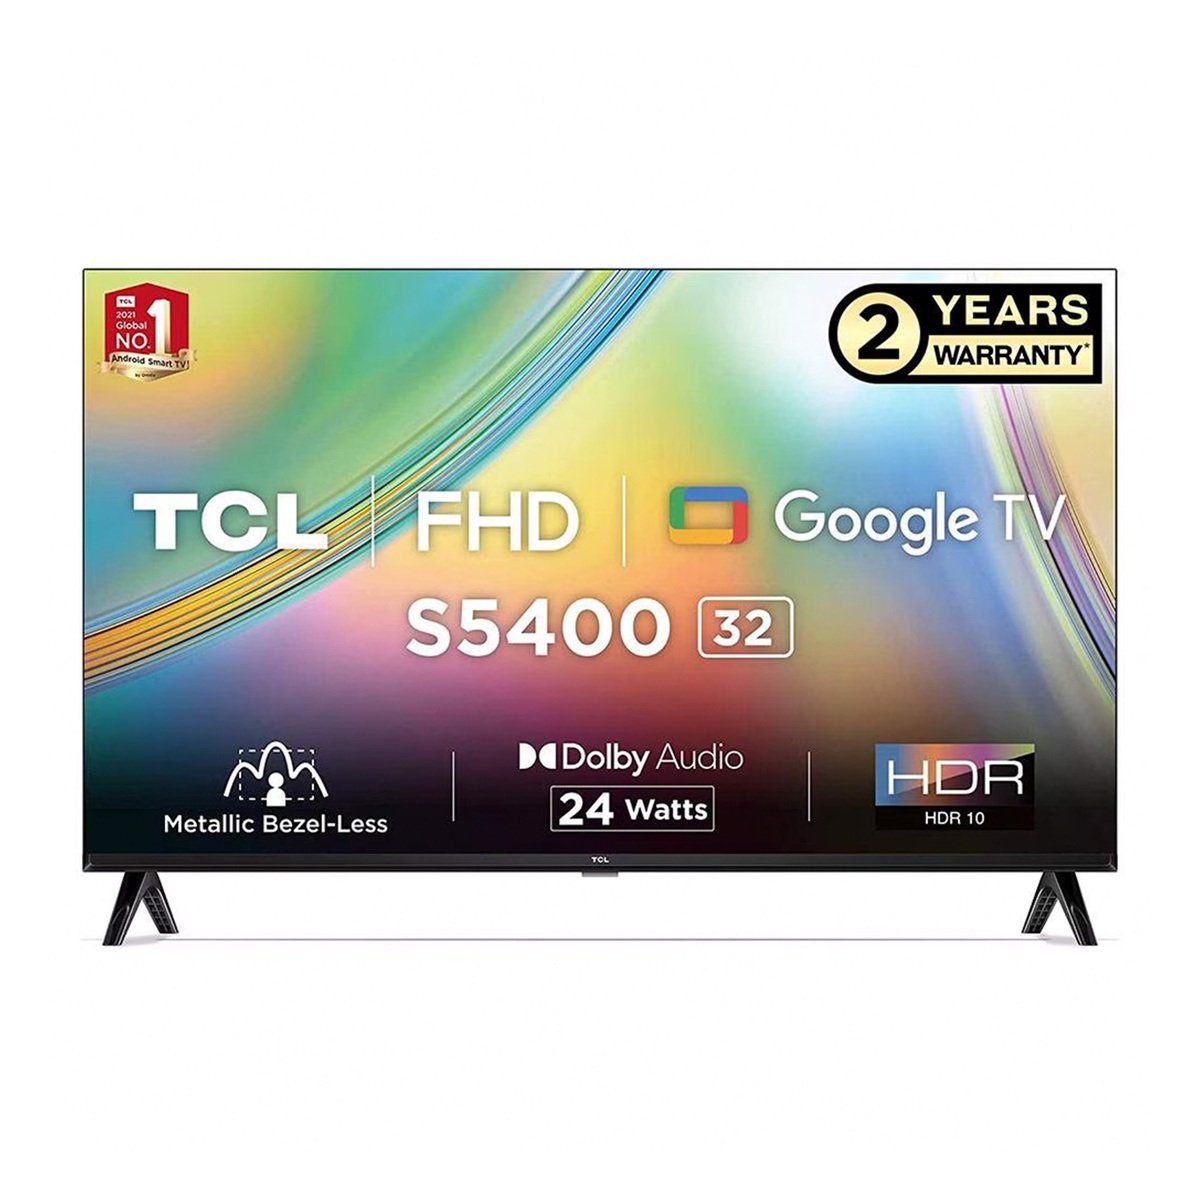 TCL FHD Google TV 32S5400 32 Inches